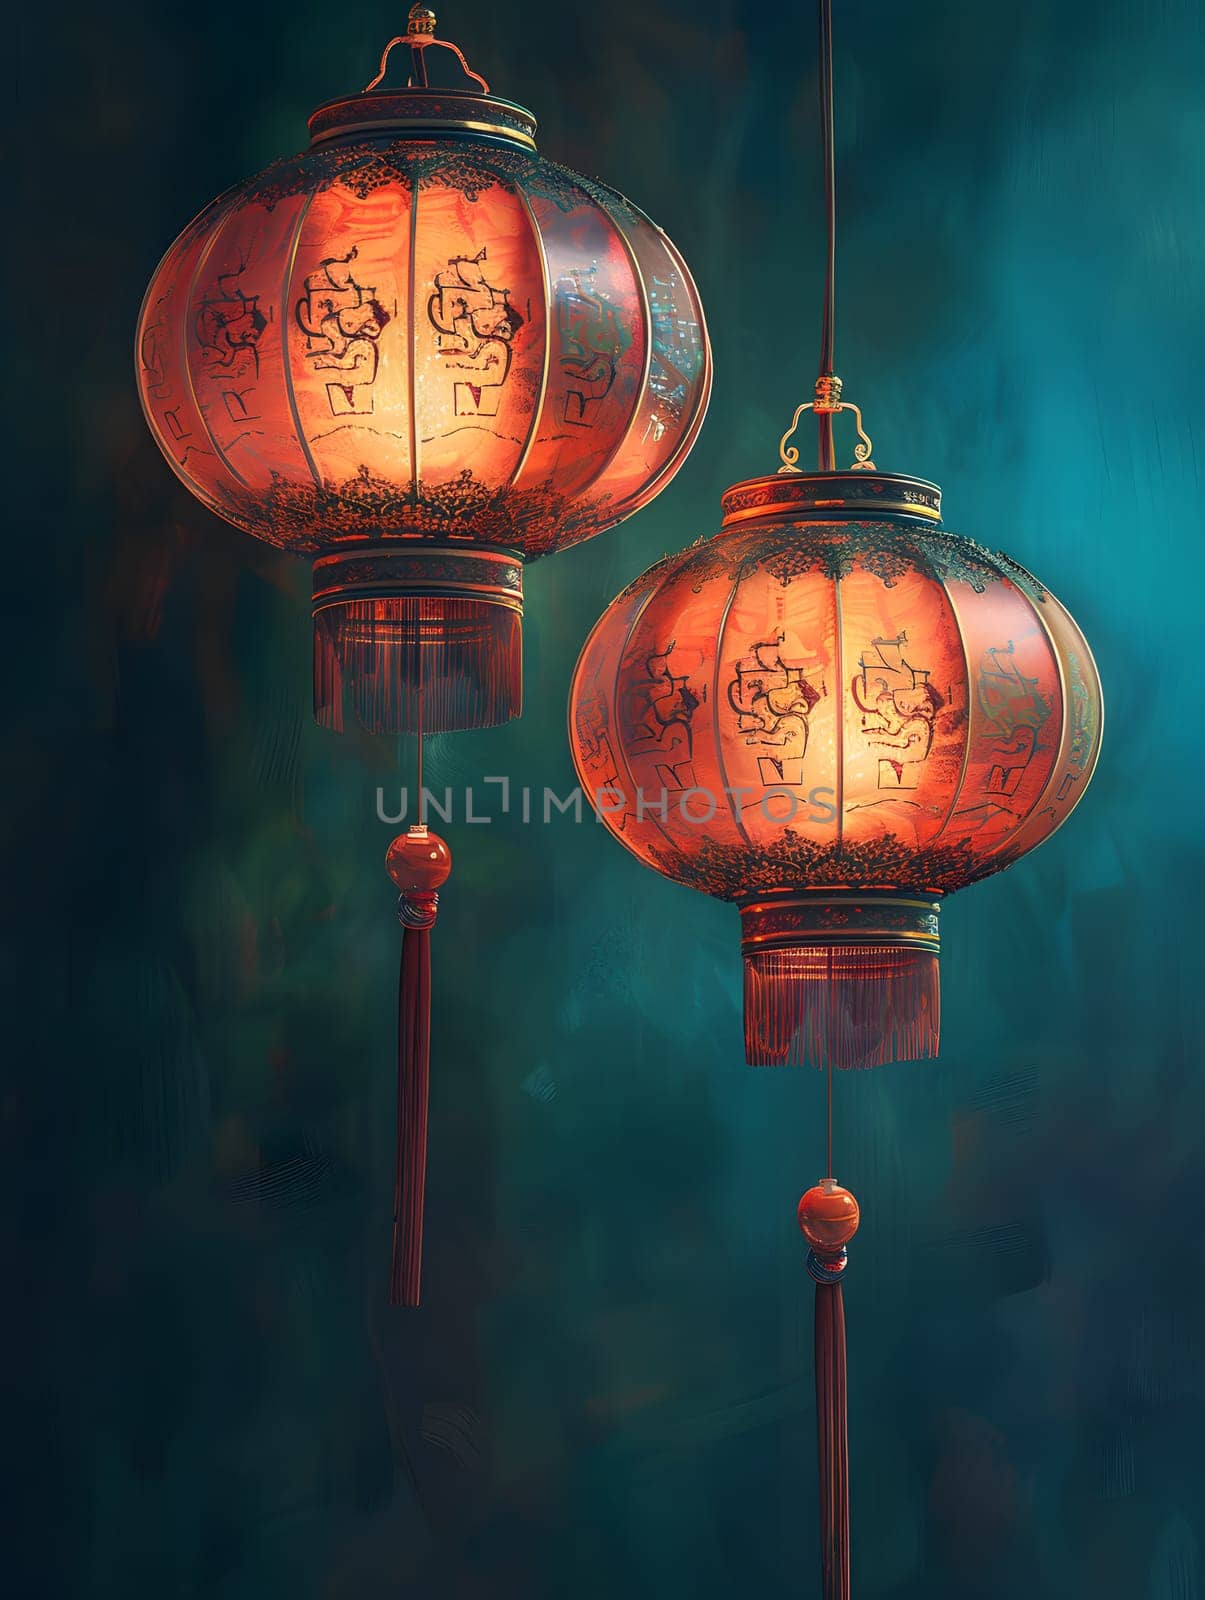 Two Chinese lanterns, glowing orange like street lights, hang from the ceiling in a dark room, casting artistic shadows and creating a watercolor effect